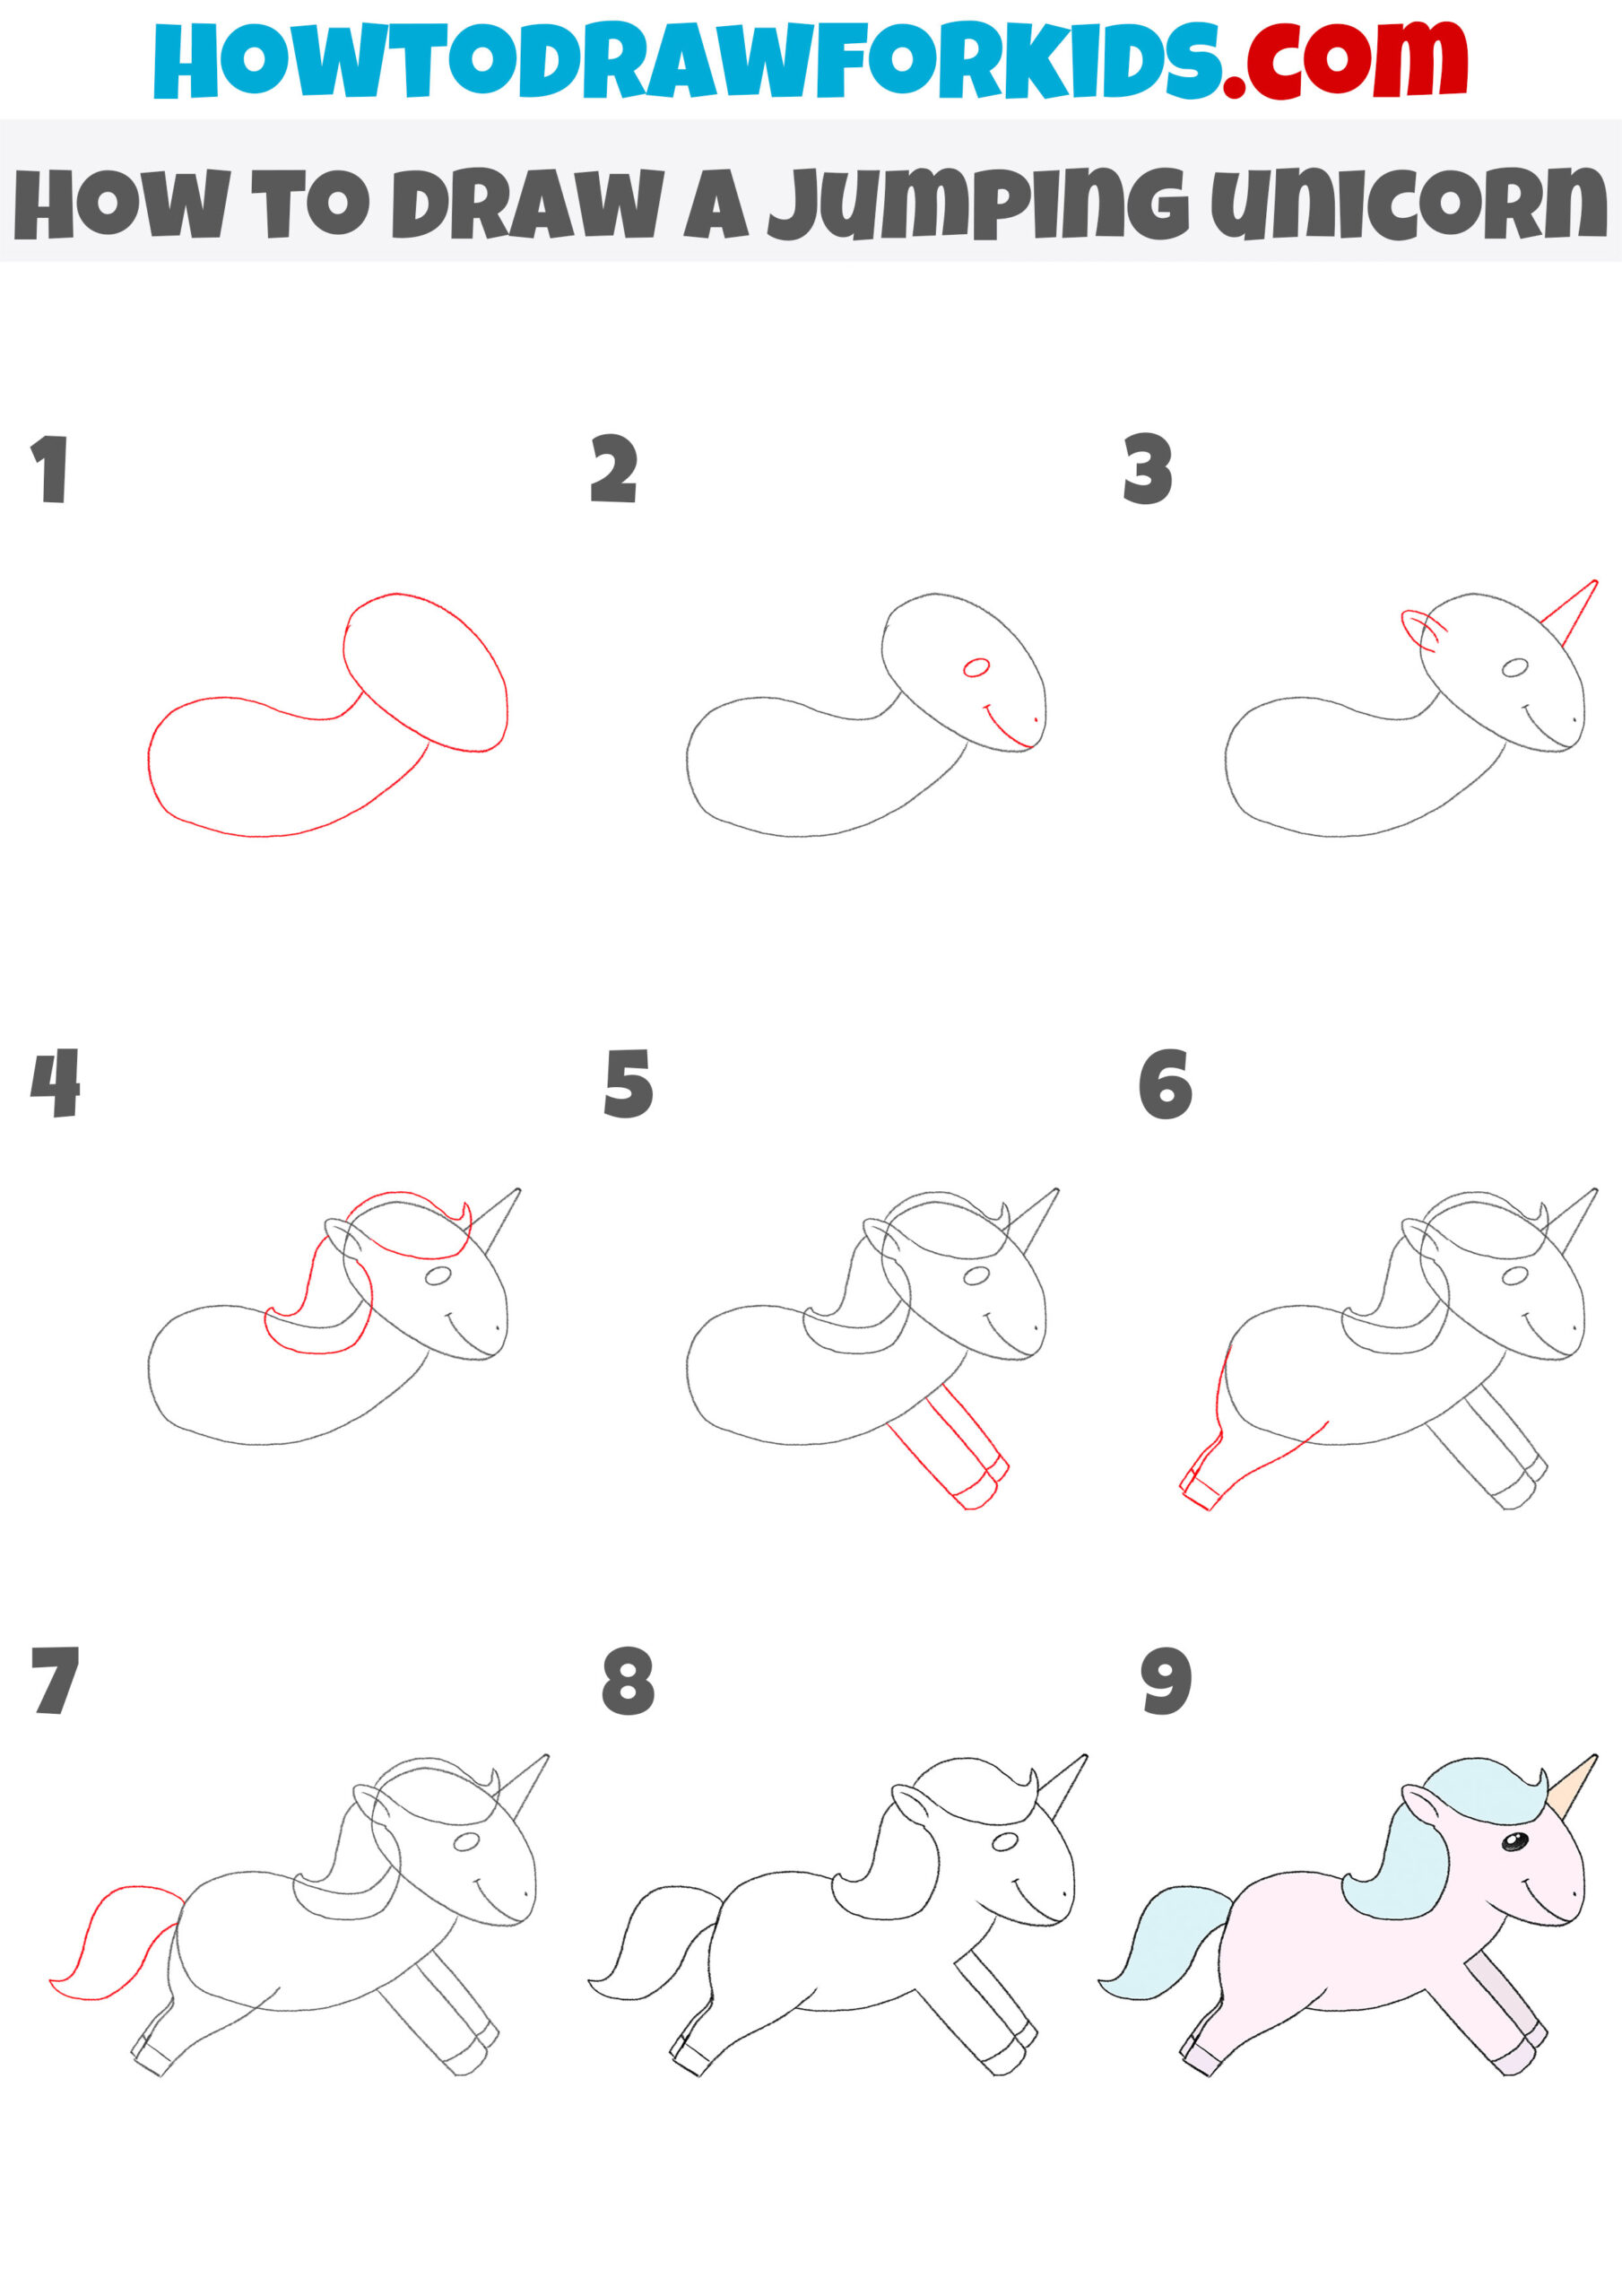 how to draw a jumping unicorn step by step